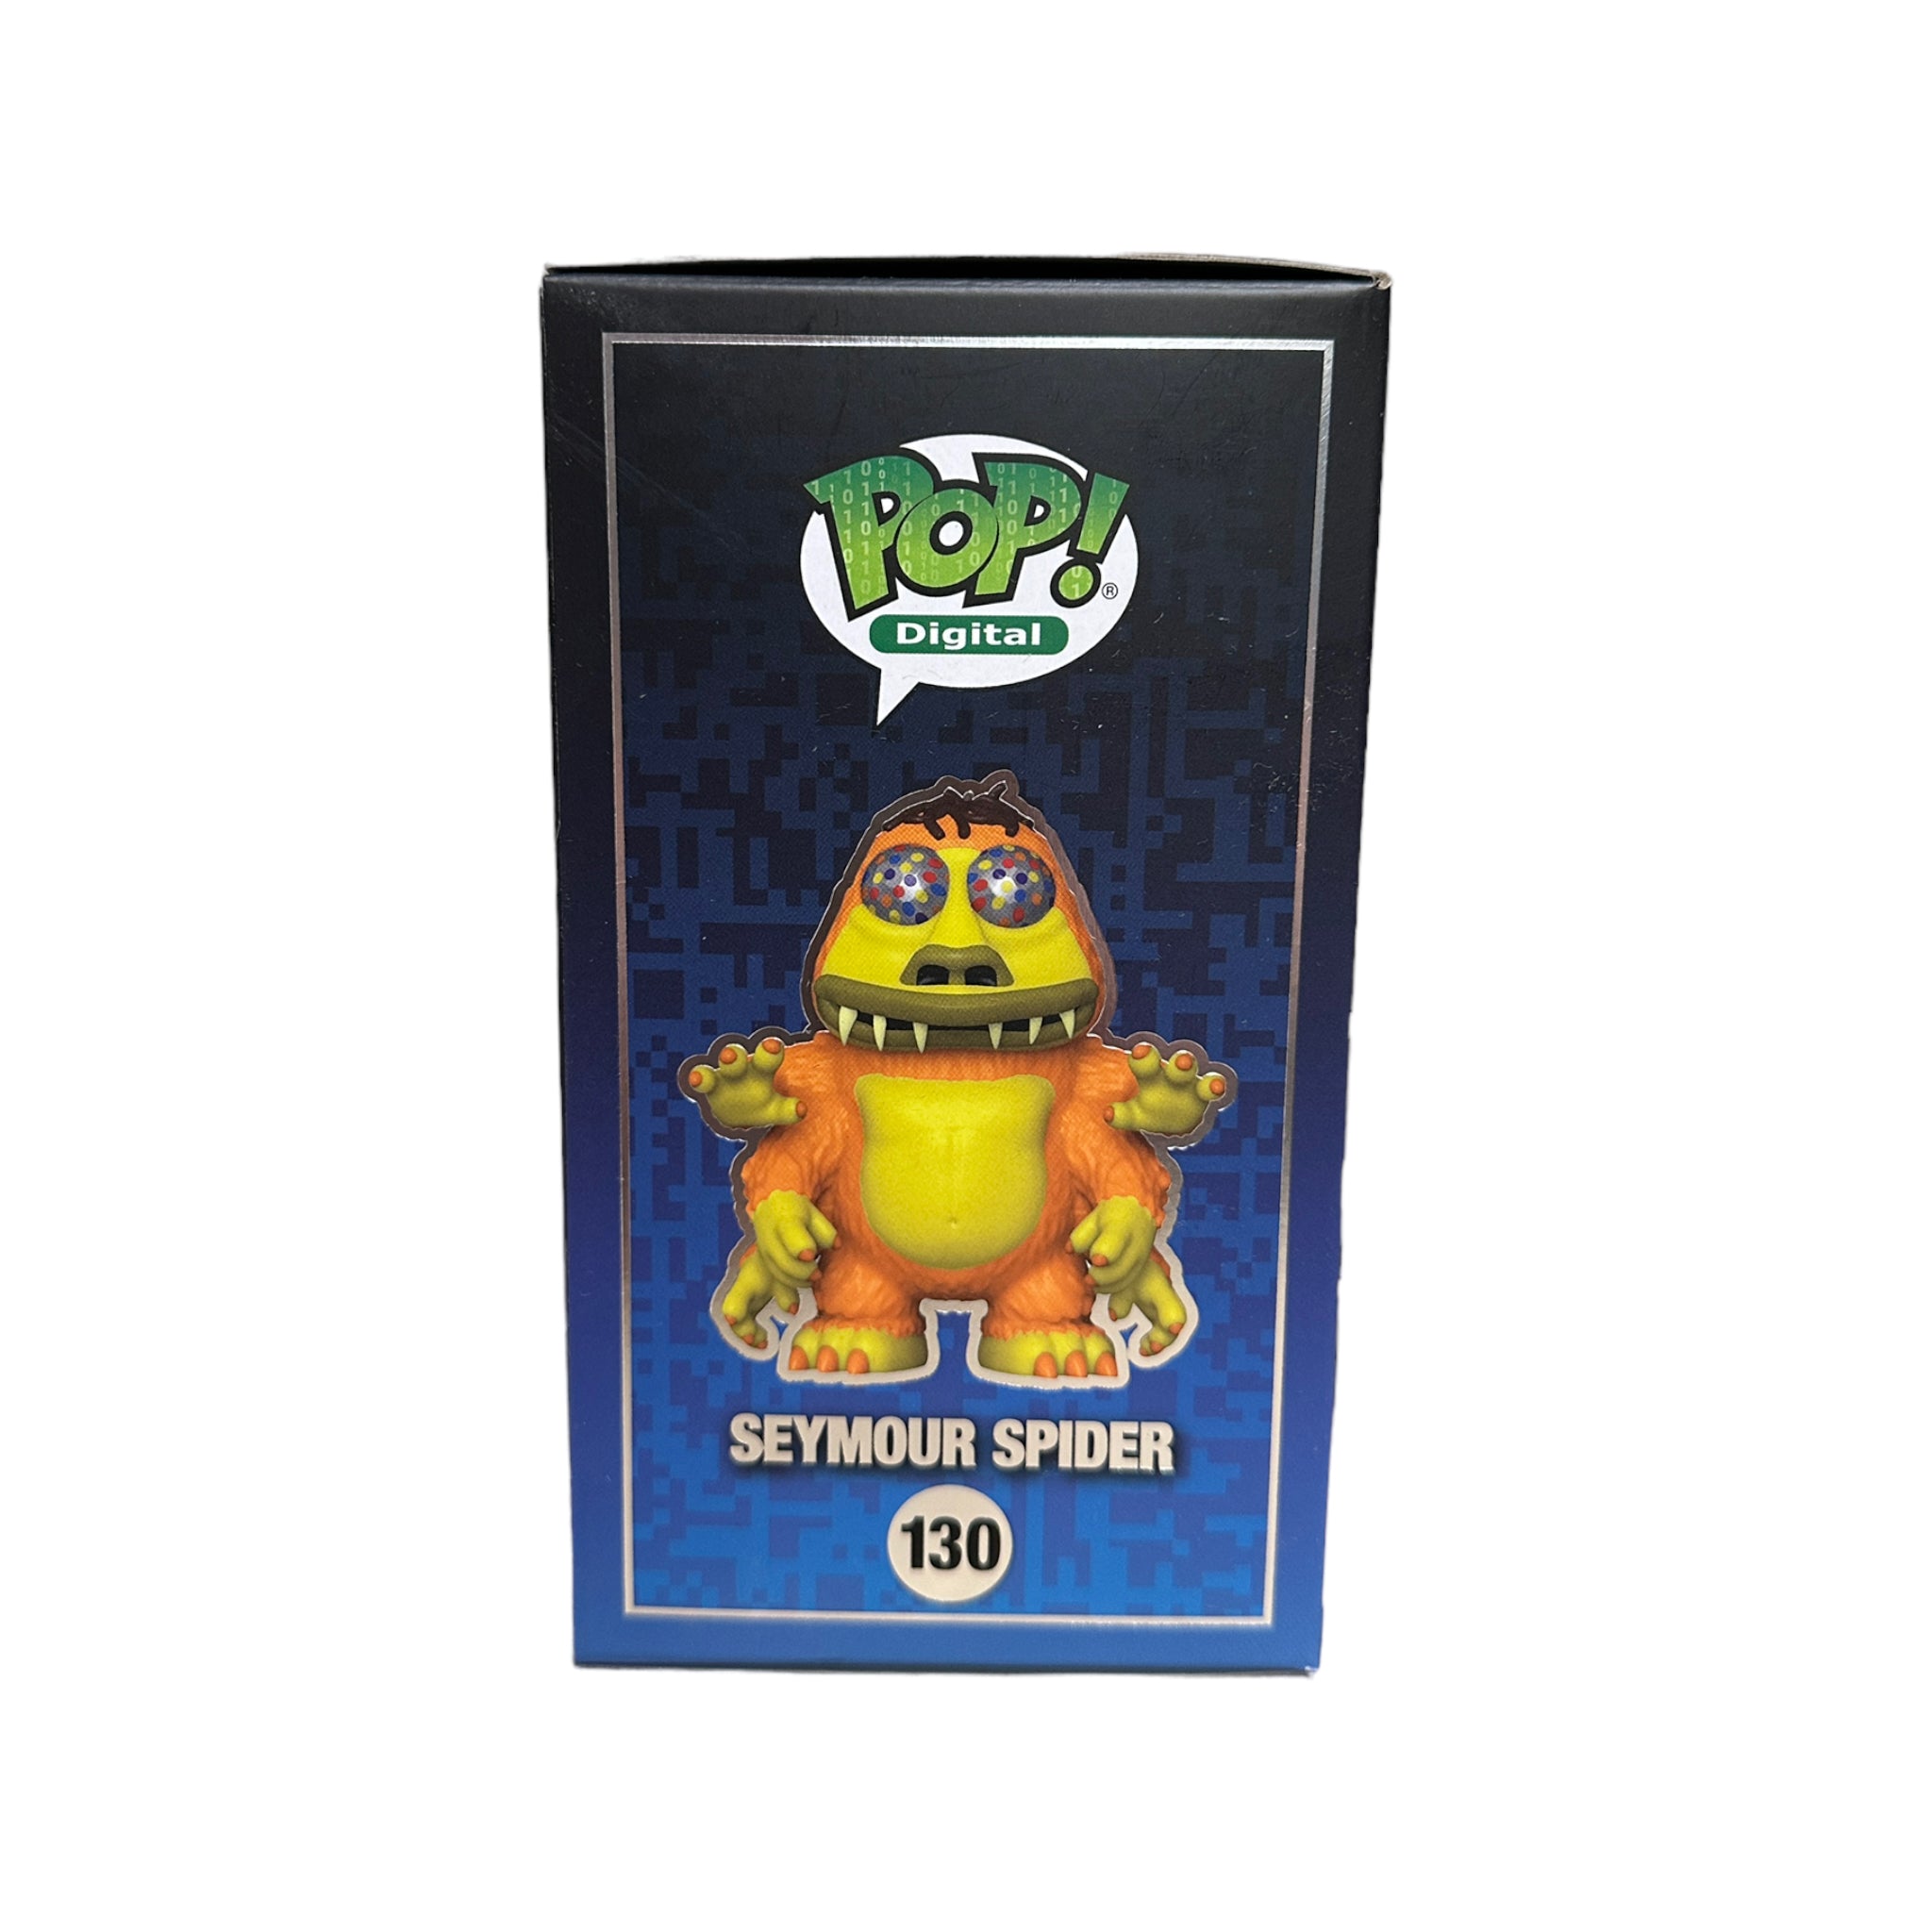 Seymour Spider #130 Funko Pop! - Sid & Marty Krofft Pictures - NFT Release Exclusive LE1400 Pcs - Condition 8.75/10